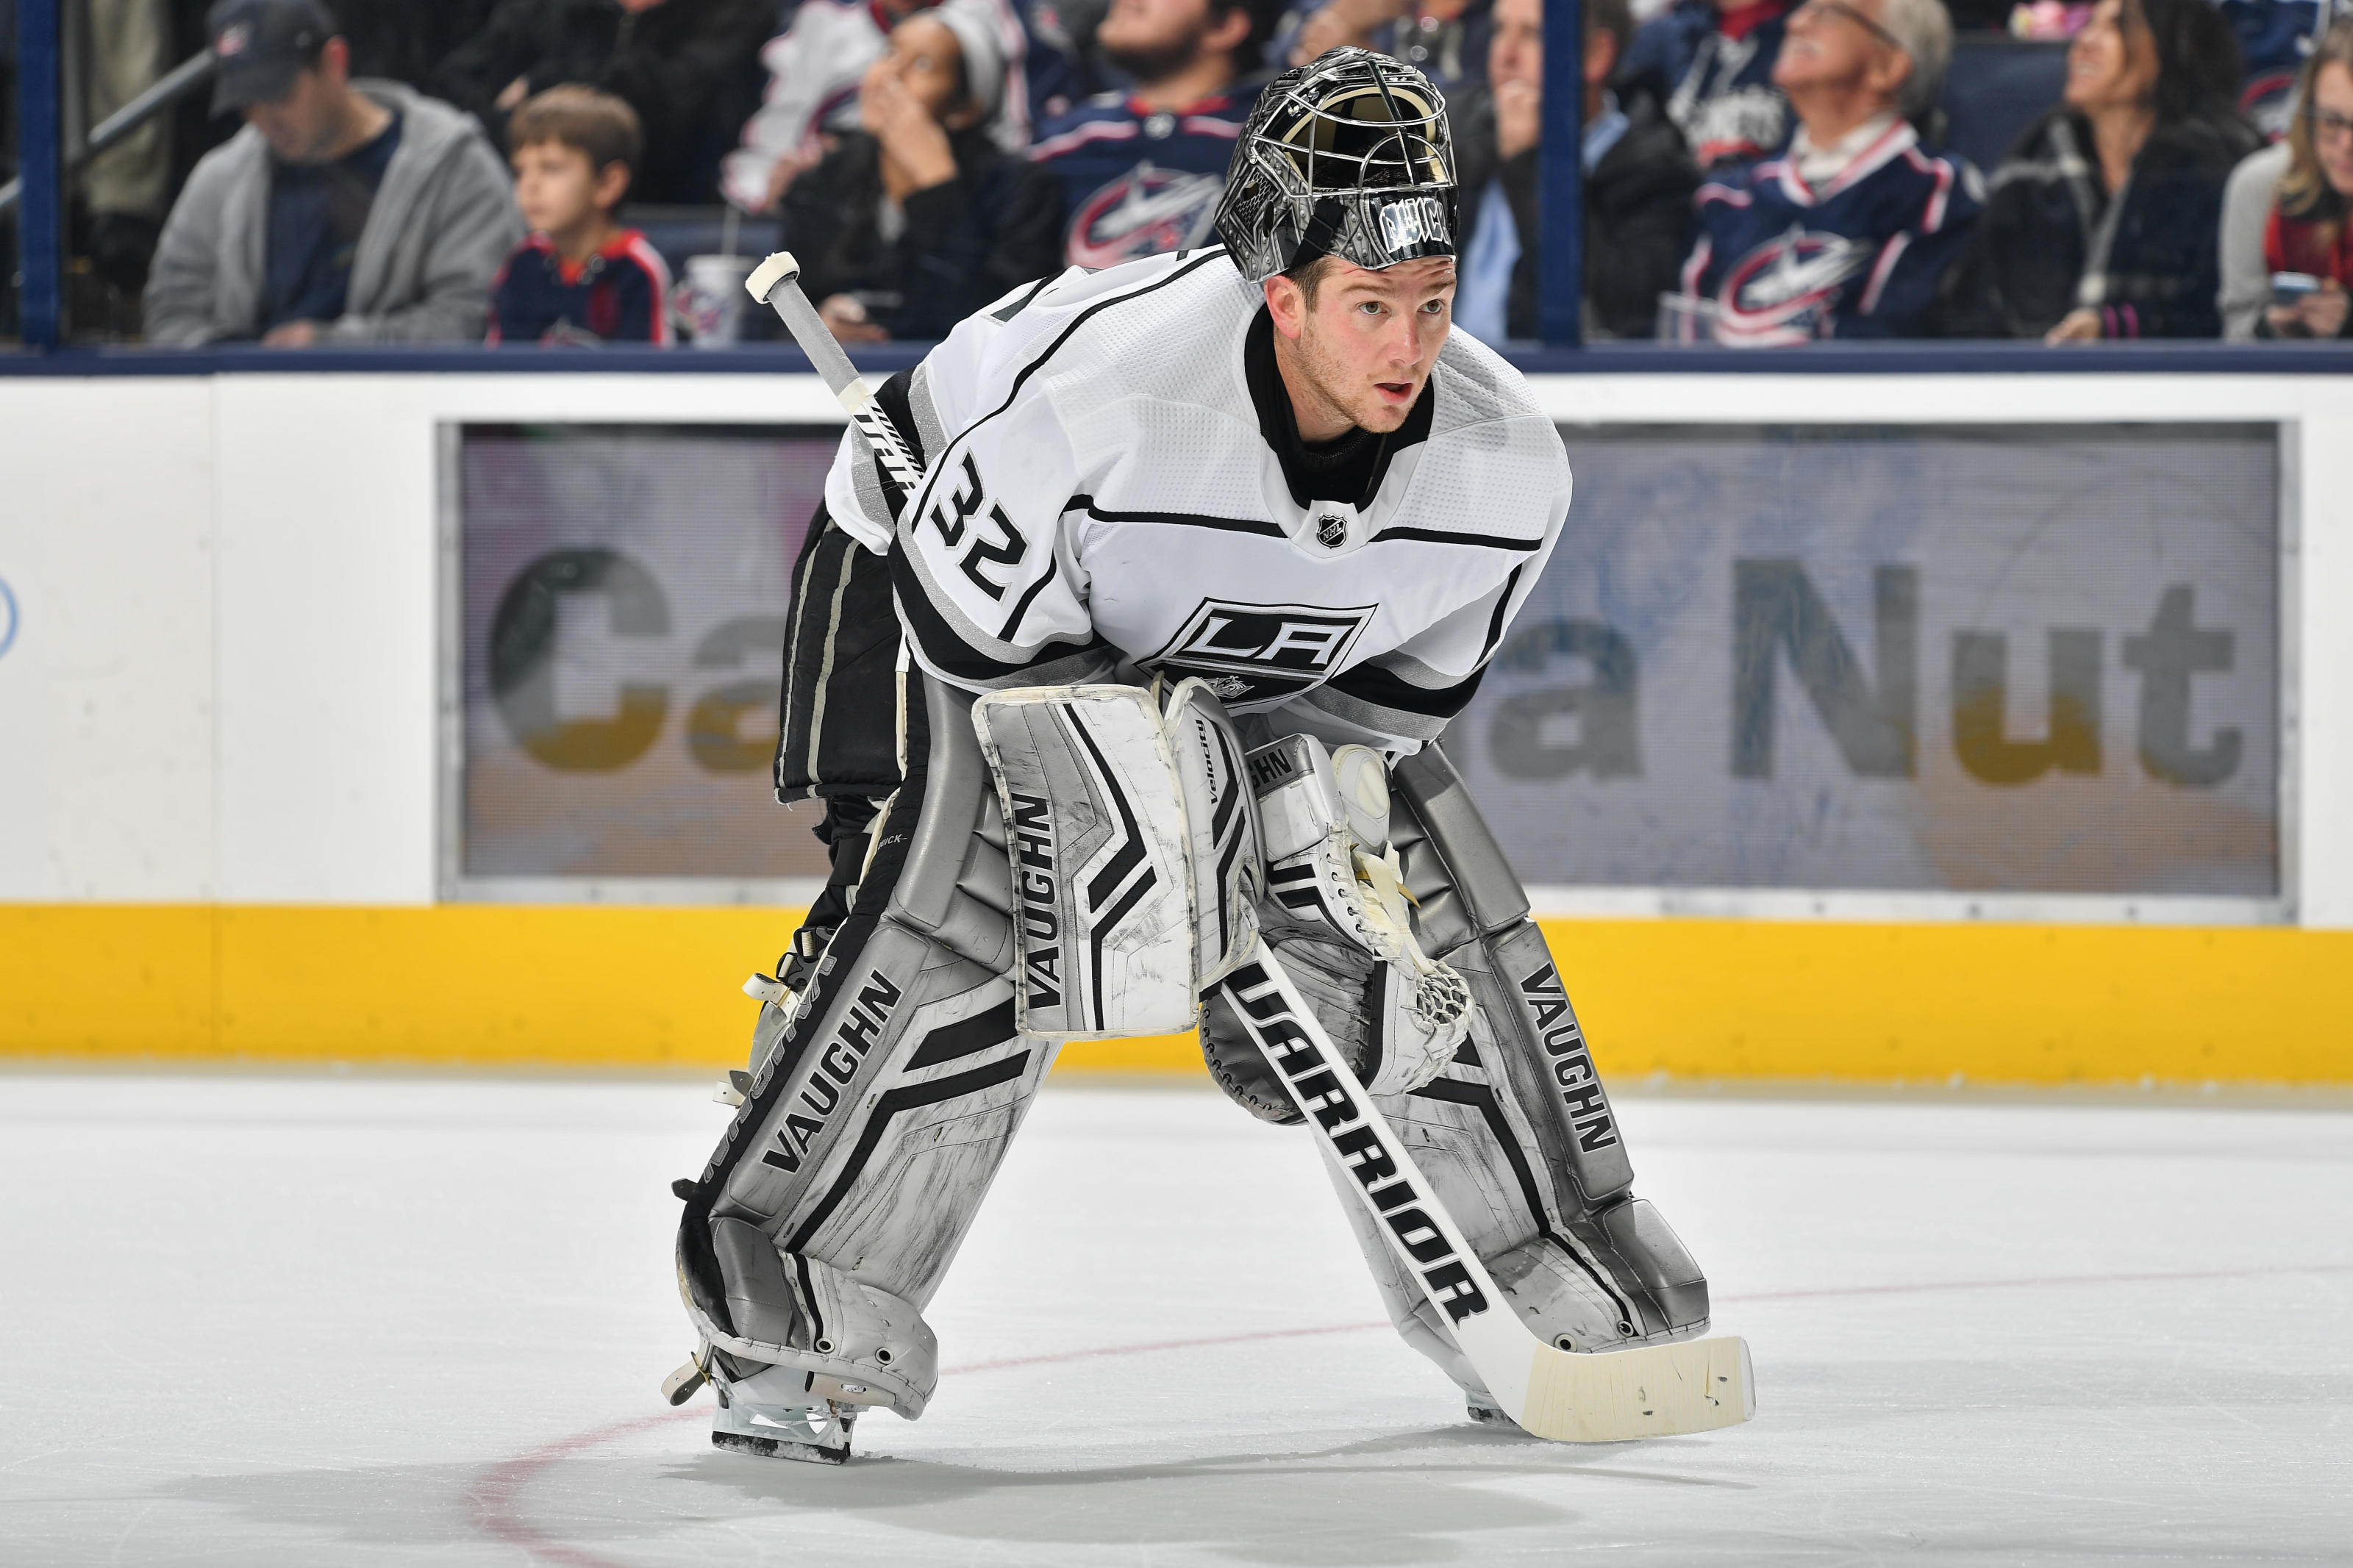 Worst jerseys in the NHL? Los Angeles Kings have them, according